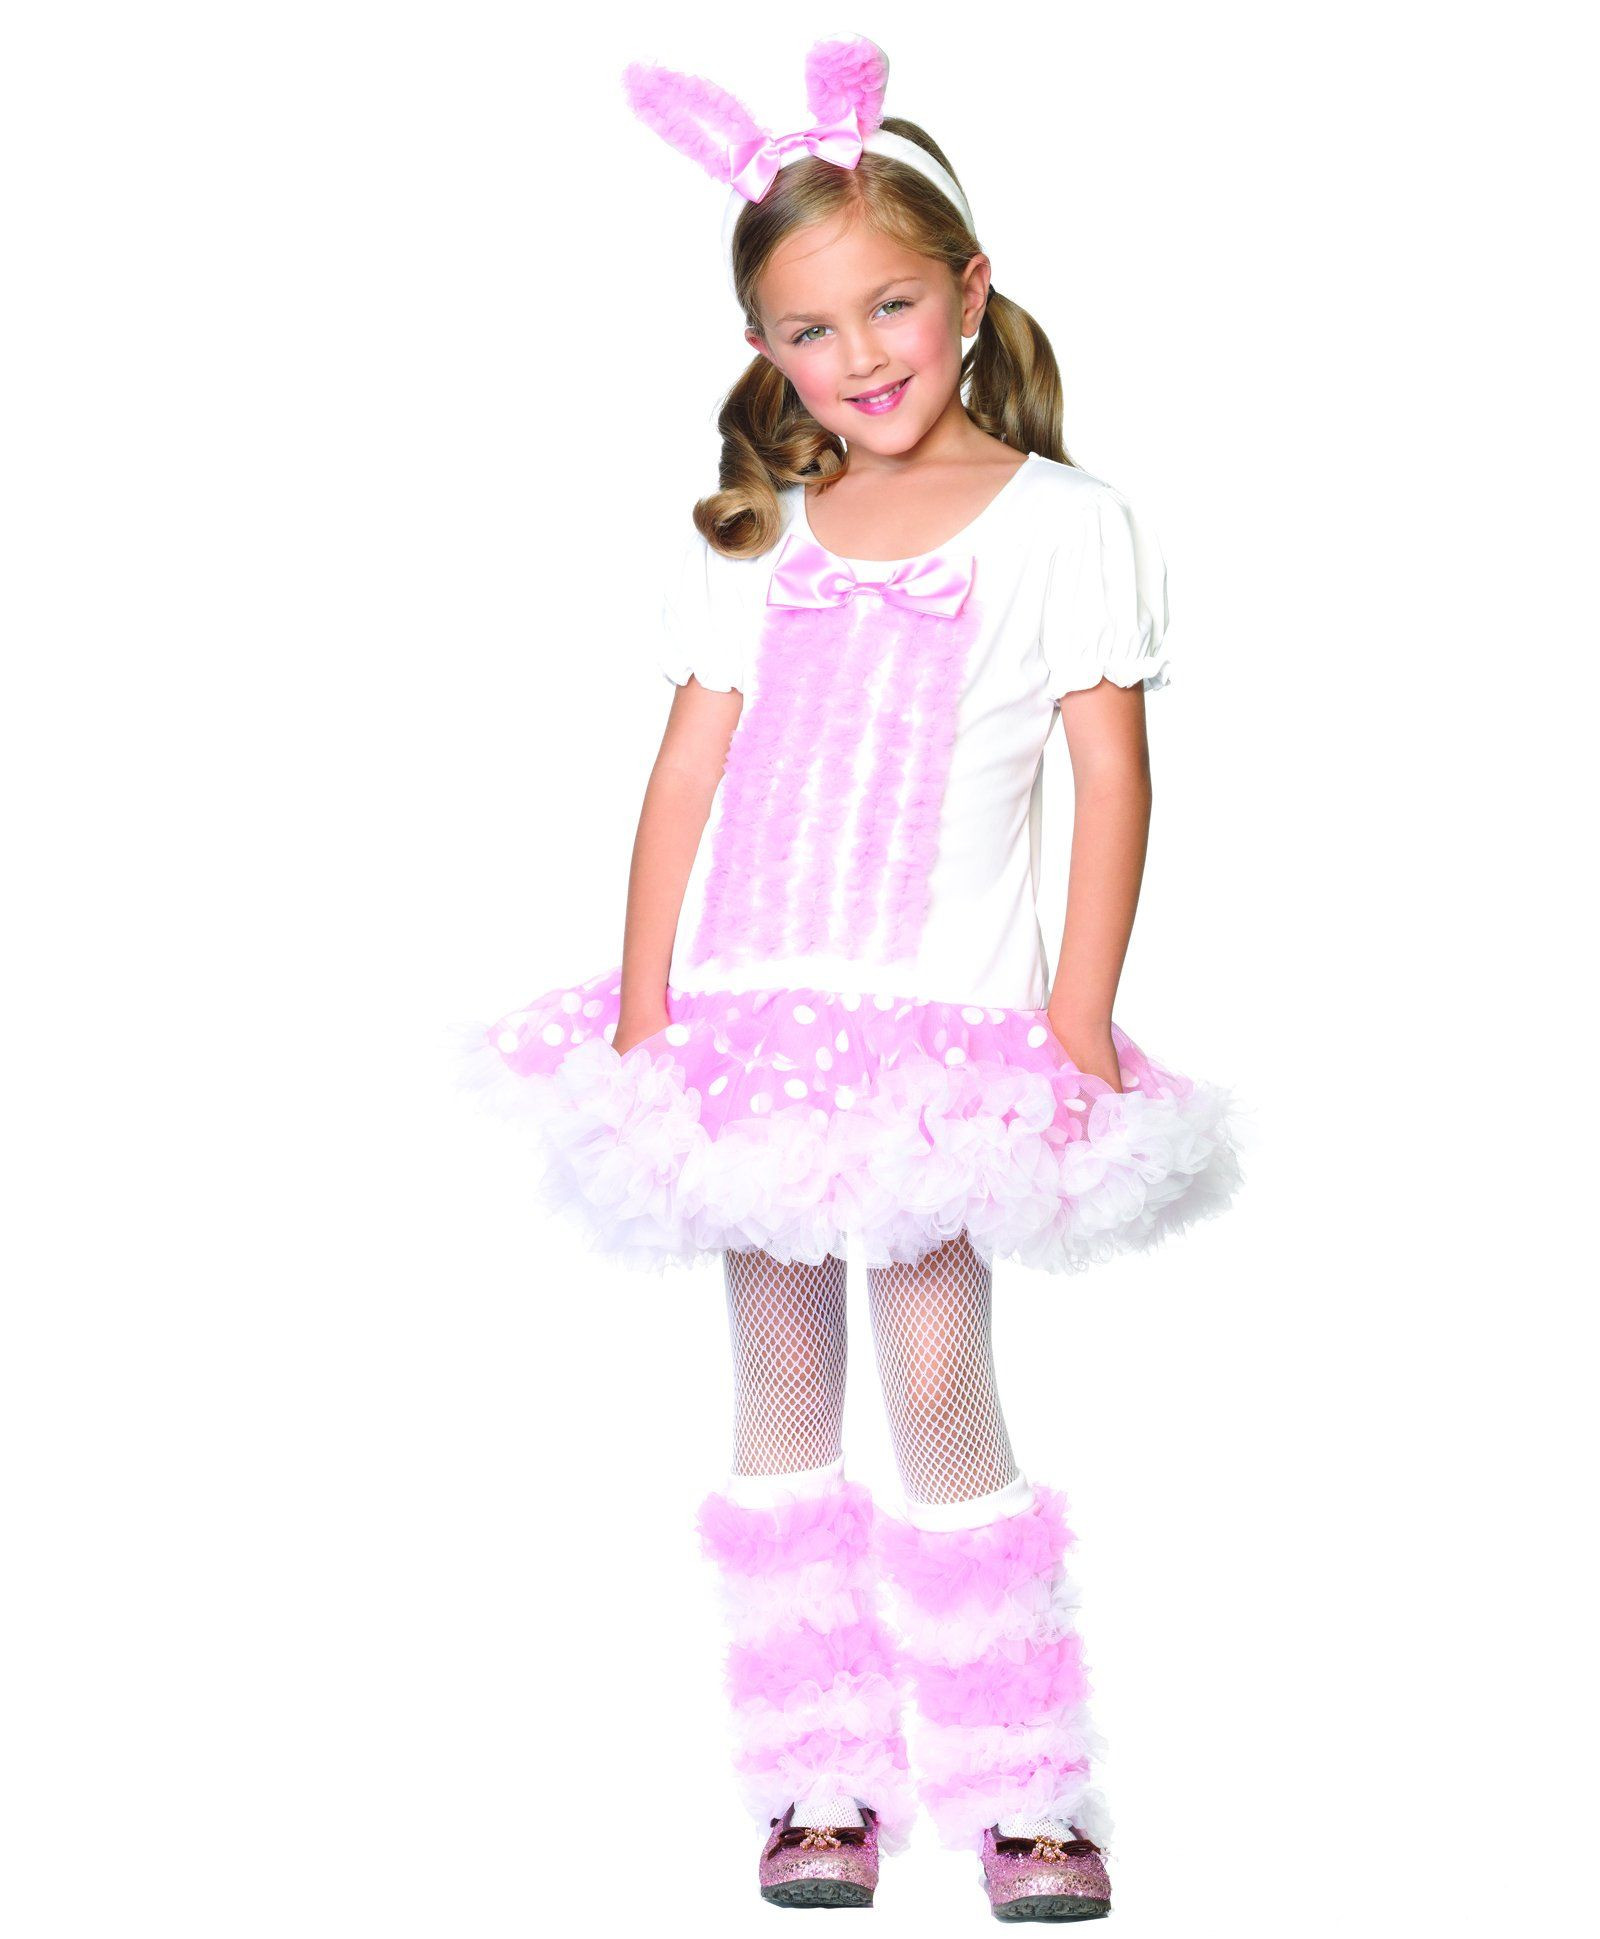 DIY Kids Bunny Costume
 Great Energizer Bunny Costume DIY with Duct Tape